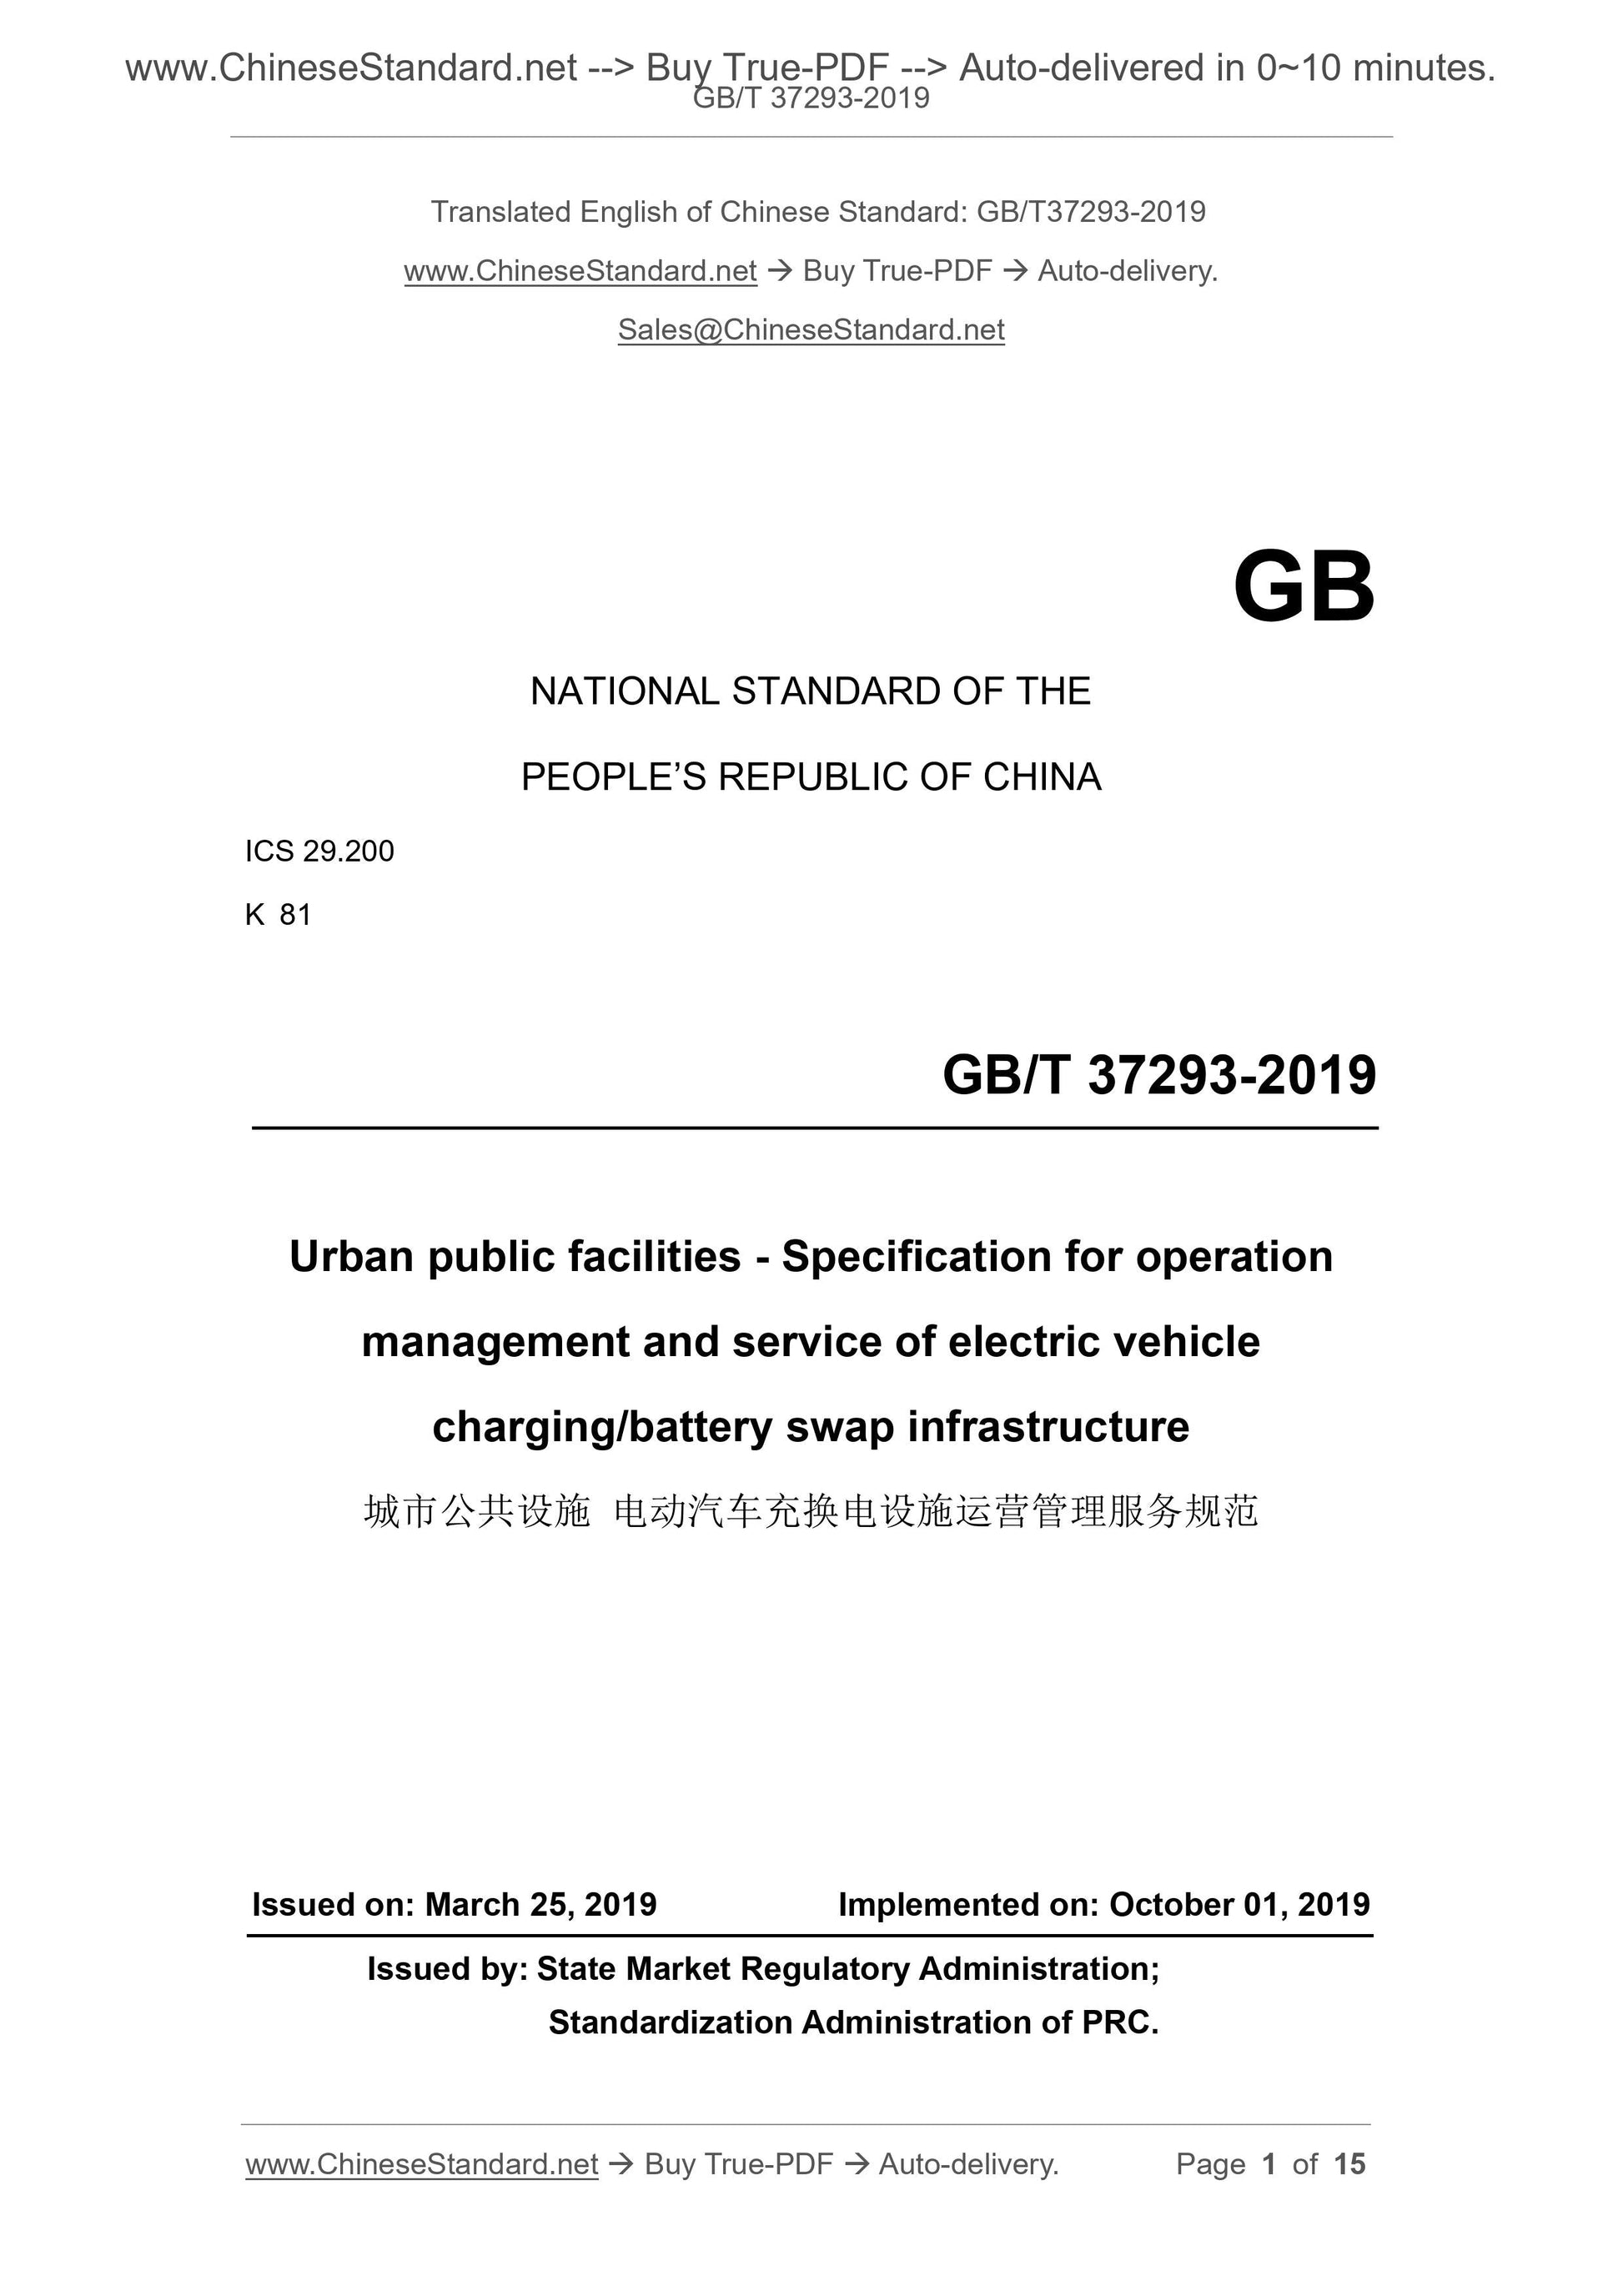 GB/T 37293-2019 Page 1